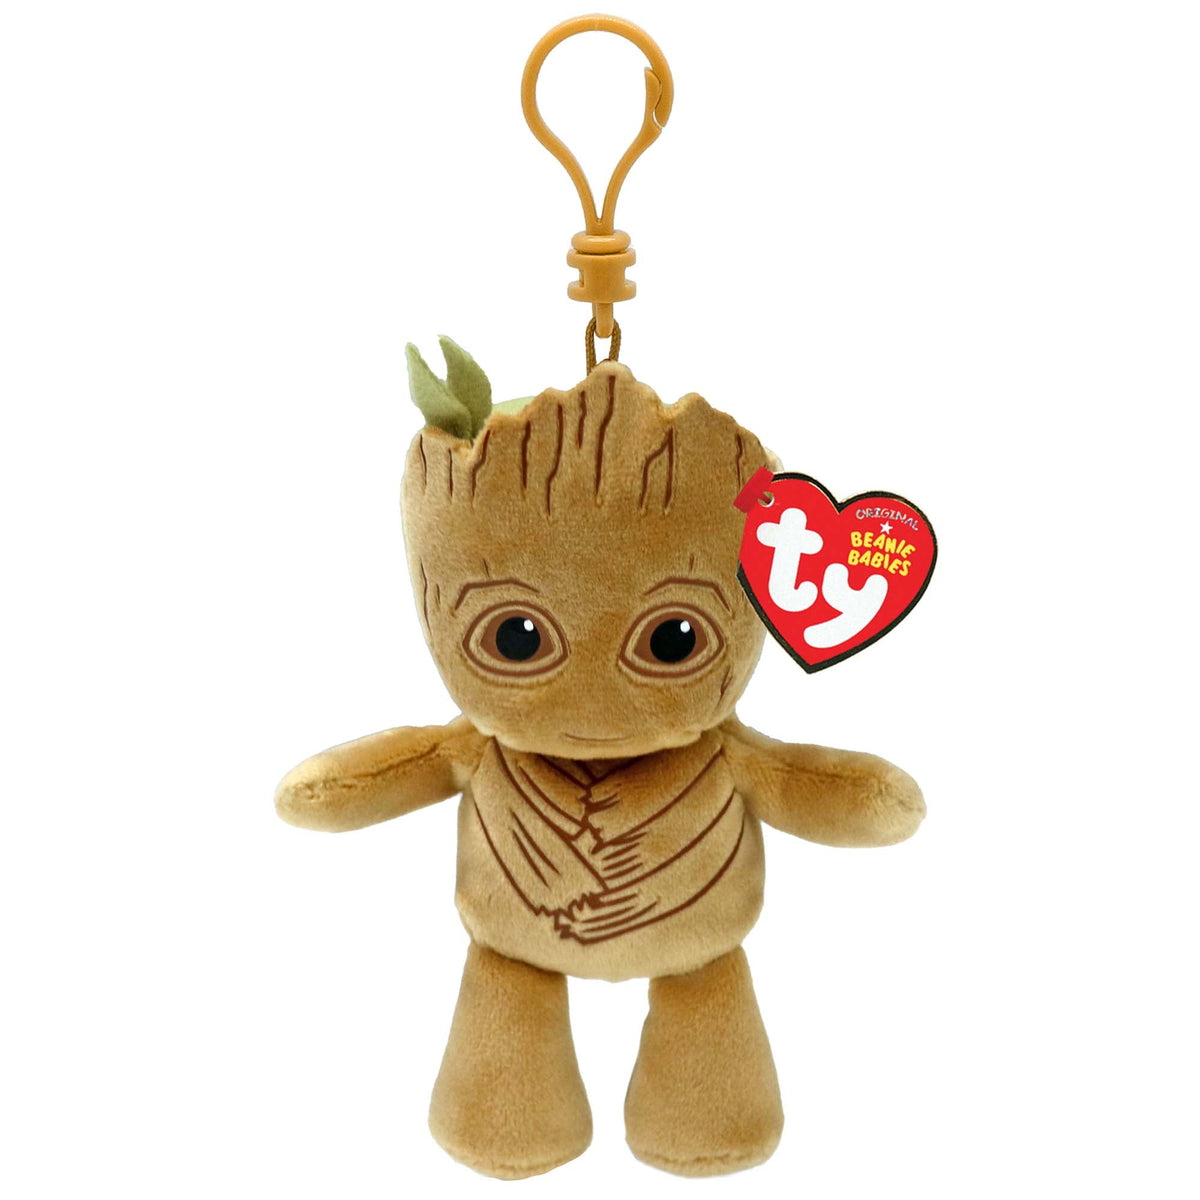 TY INC Plushes Marvel TY Beanie Boos Plush with Clip, Groot, 5 Inches, 1 Count